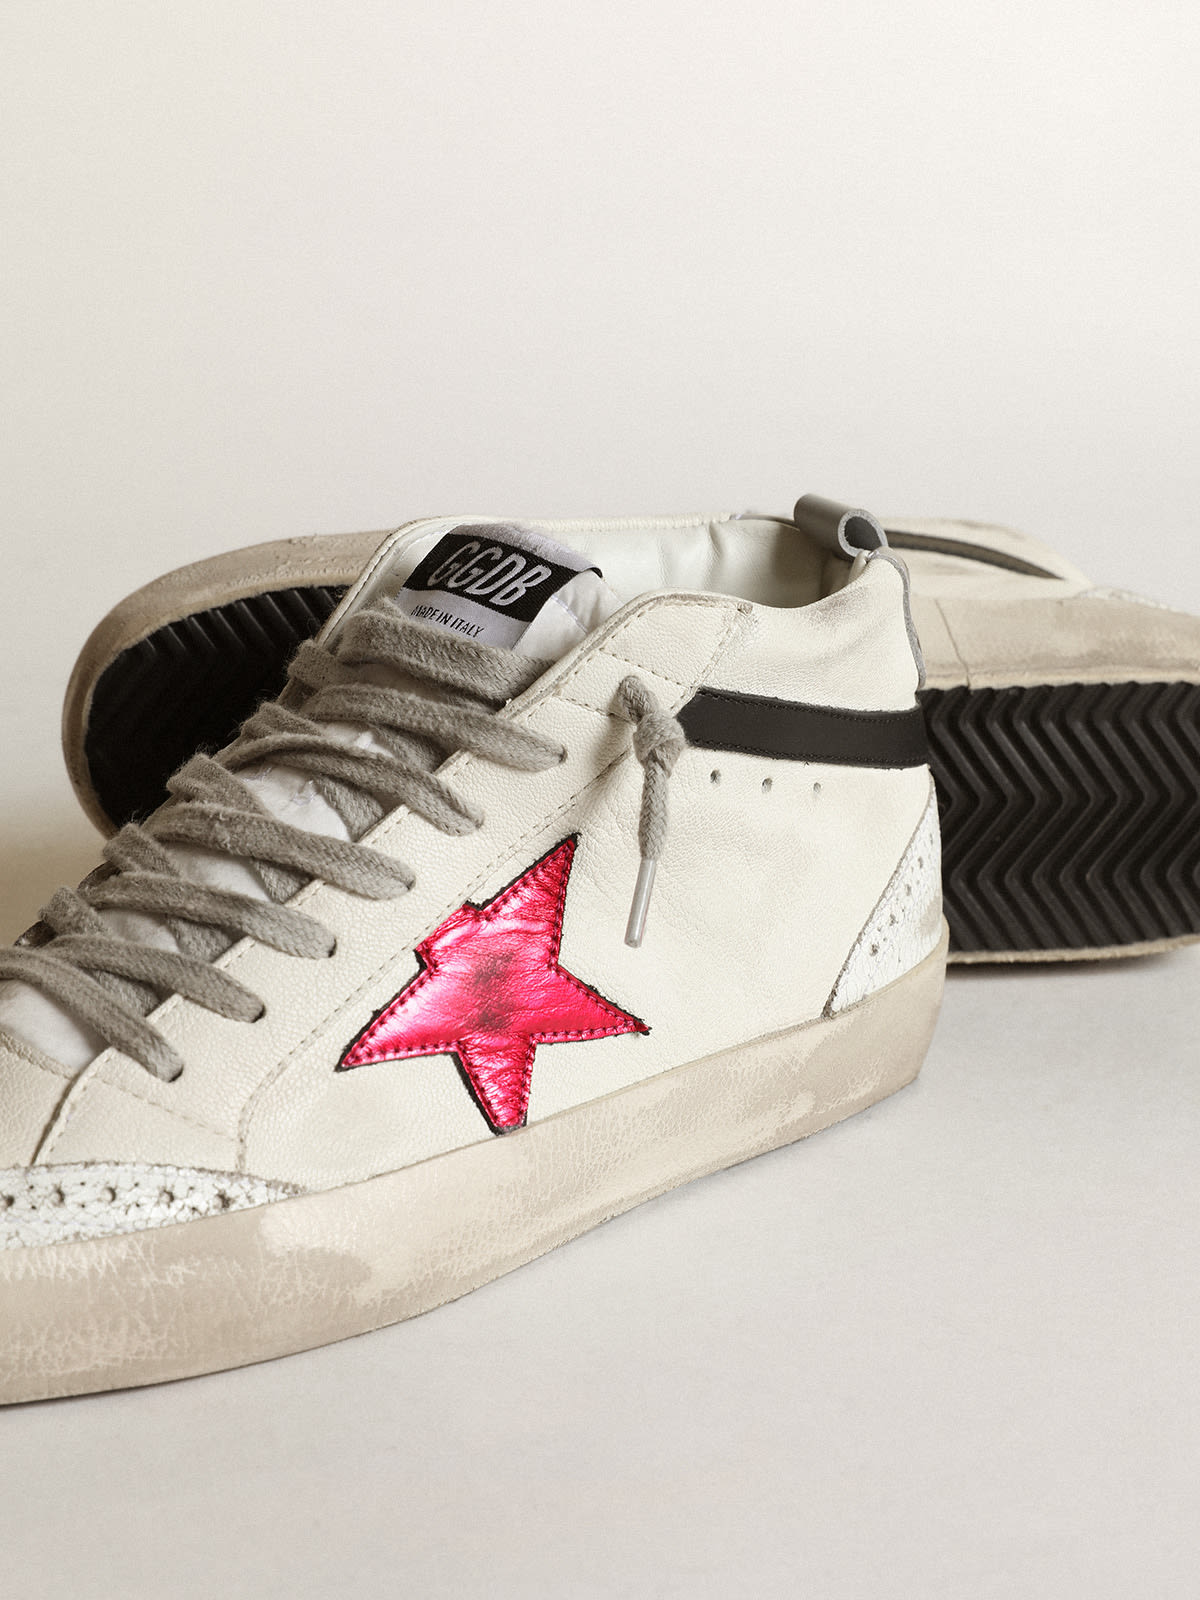 Golden Goose - Mid Star with a pink laminated leather star and black flash in 